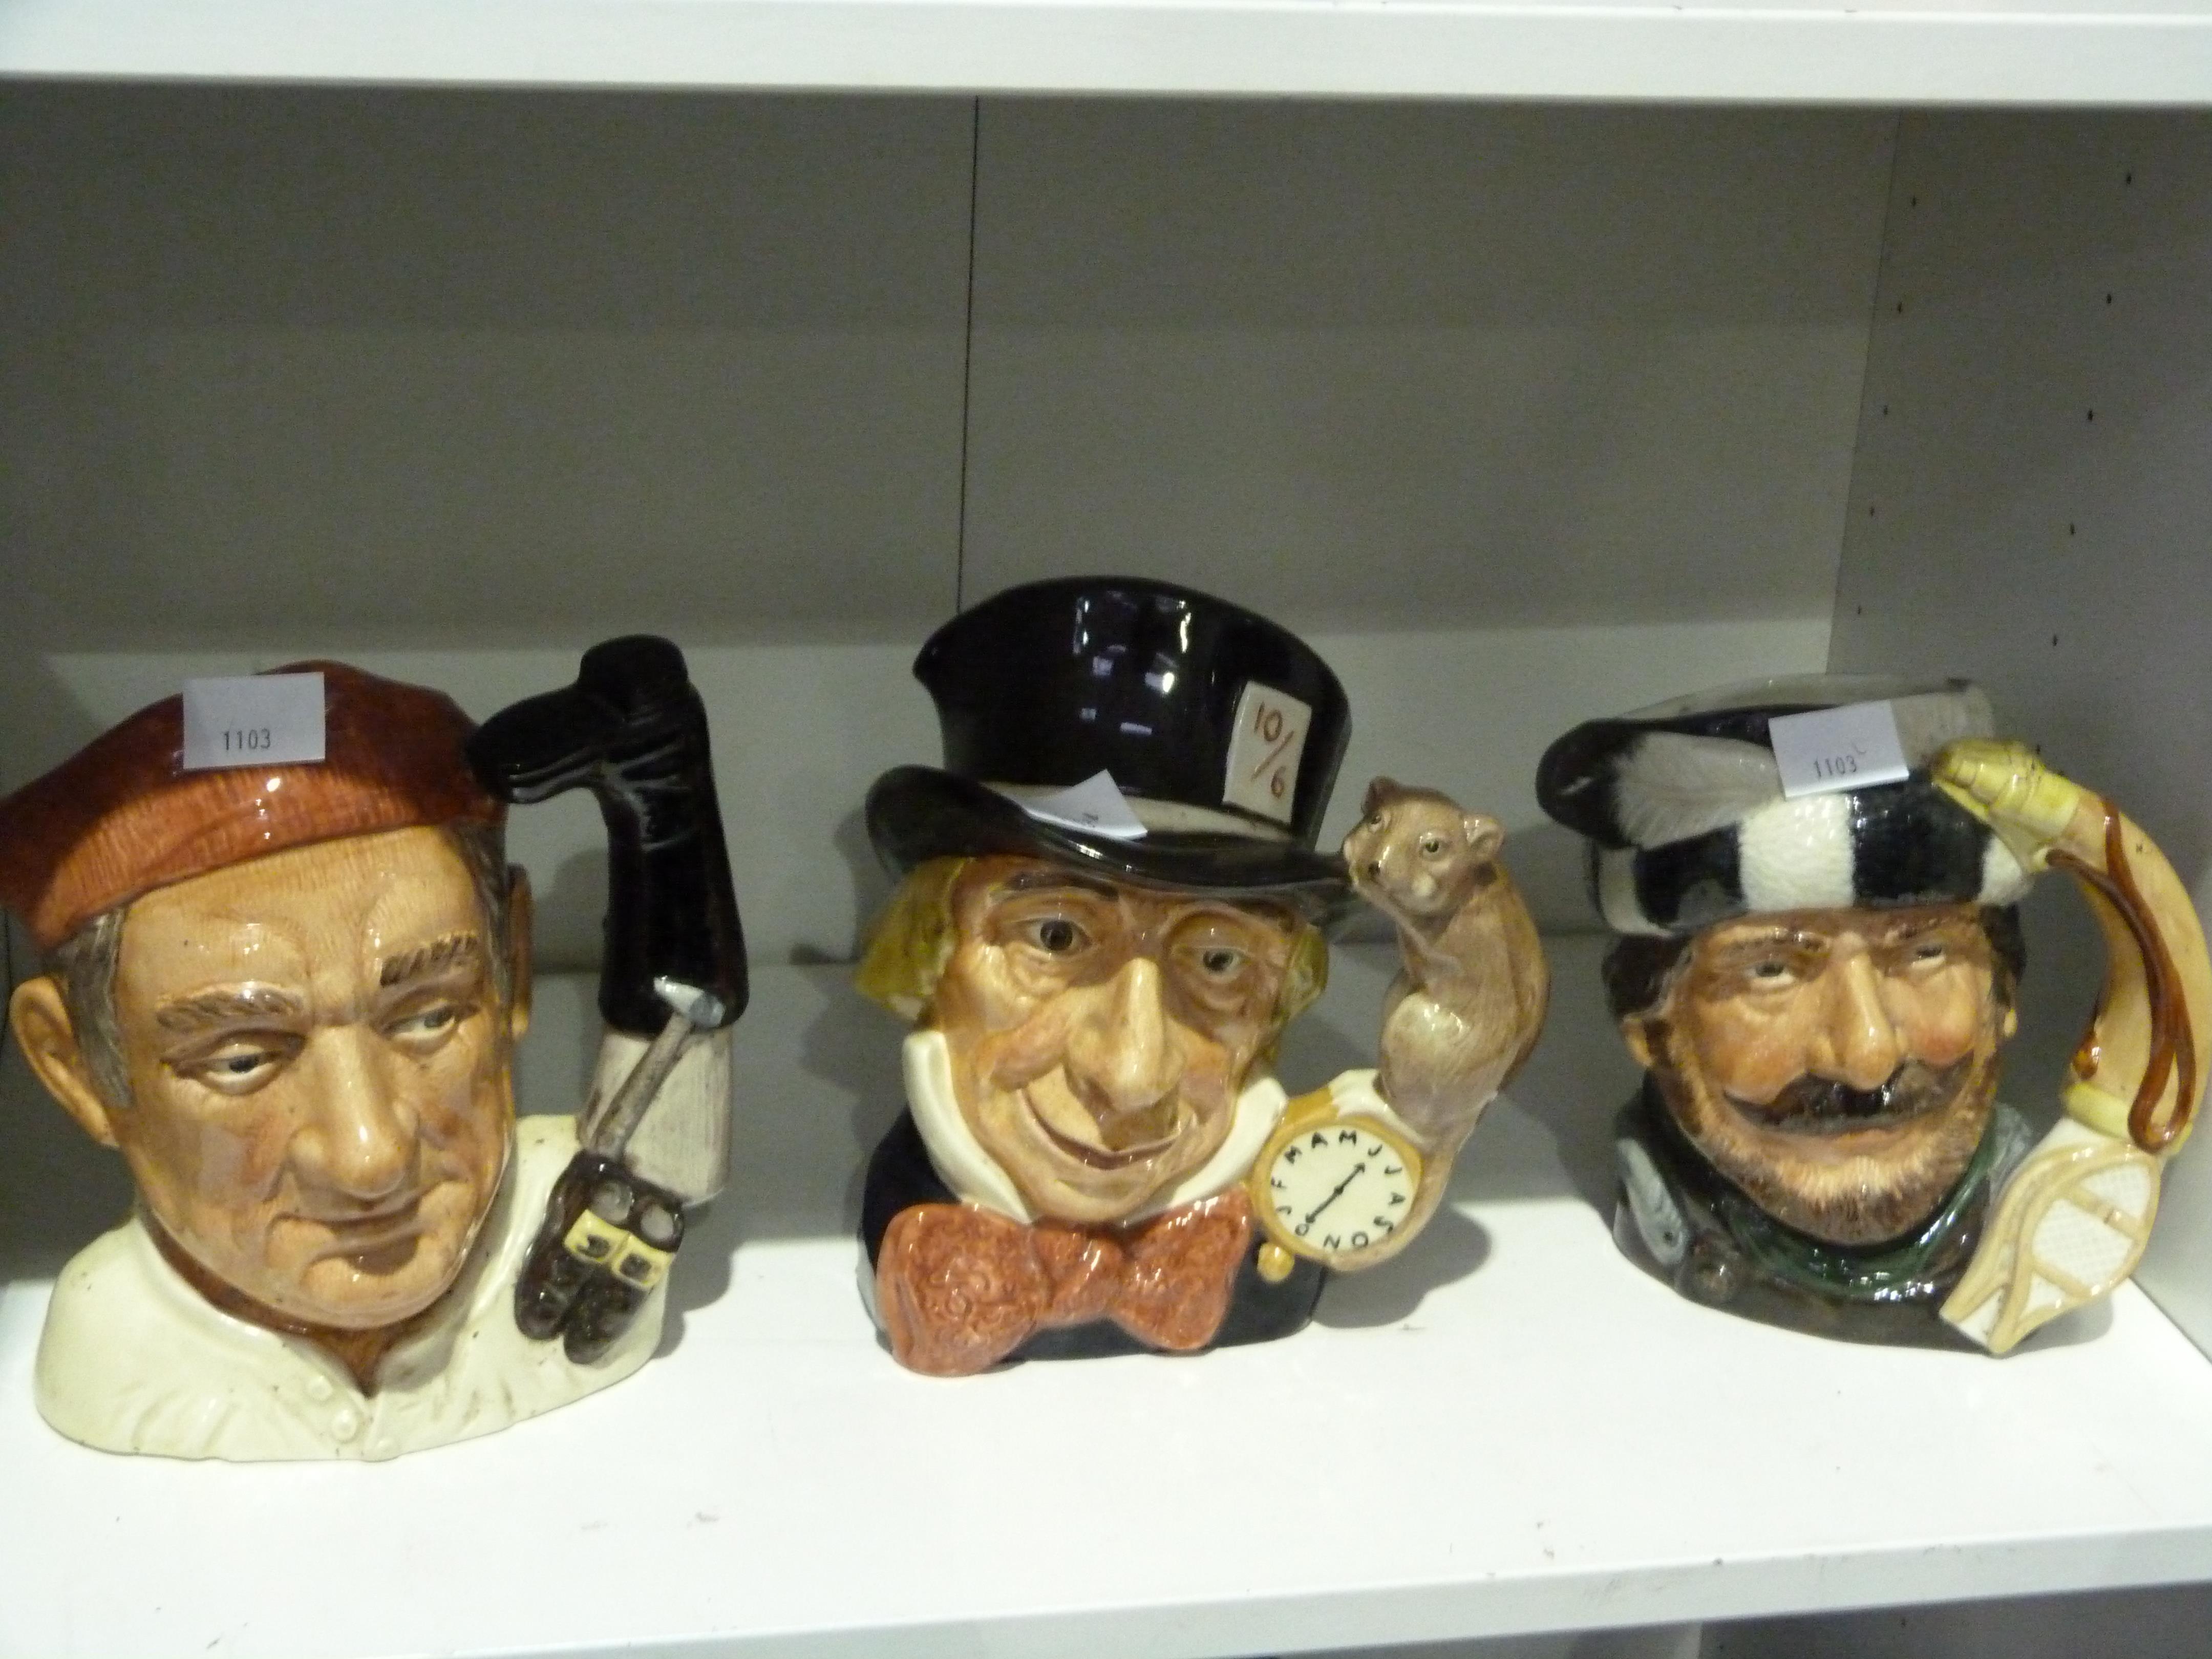 This is a Timed Online Auction on Bidspotter.co.uk, Click here to bid. Three Royal Doulton Toby